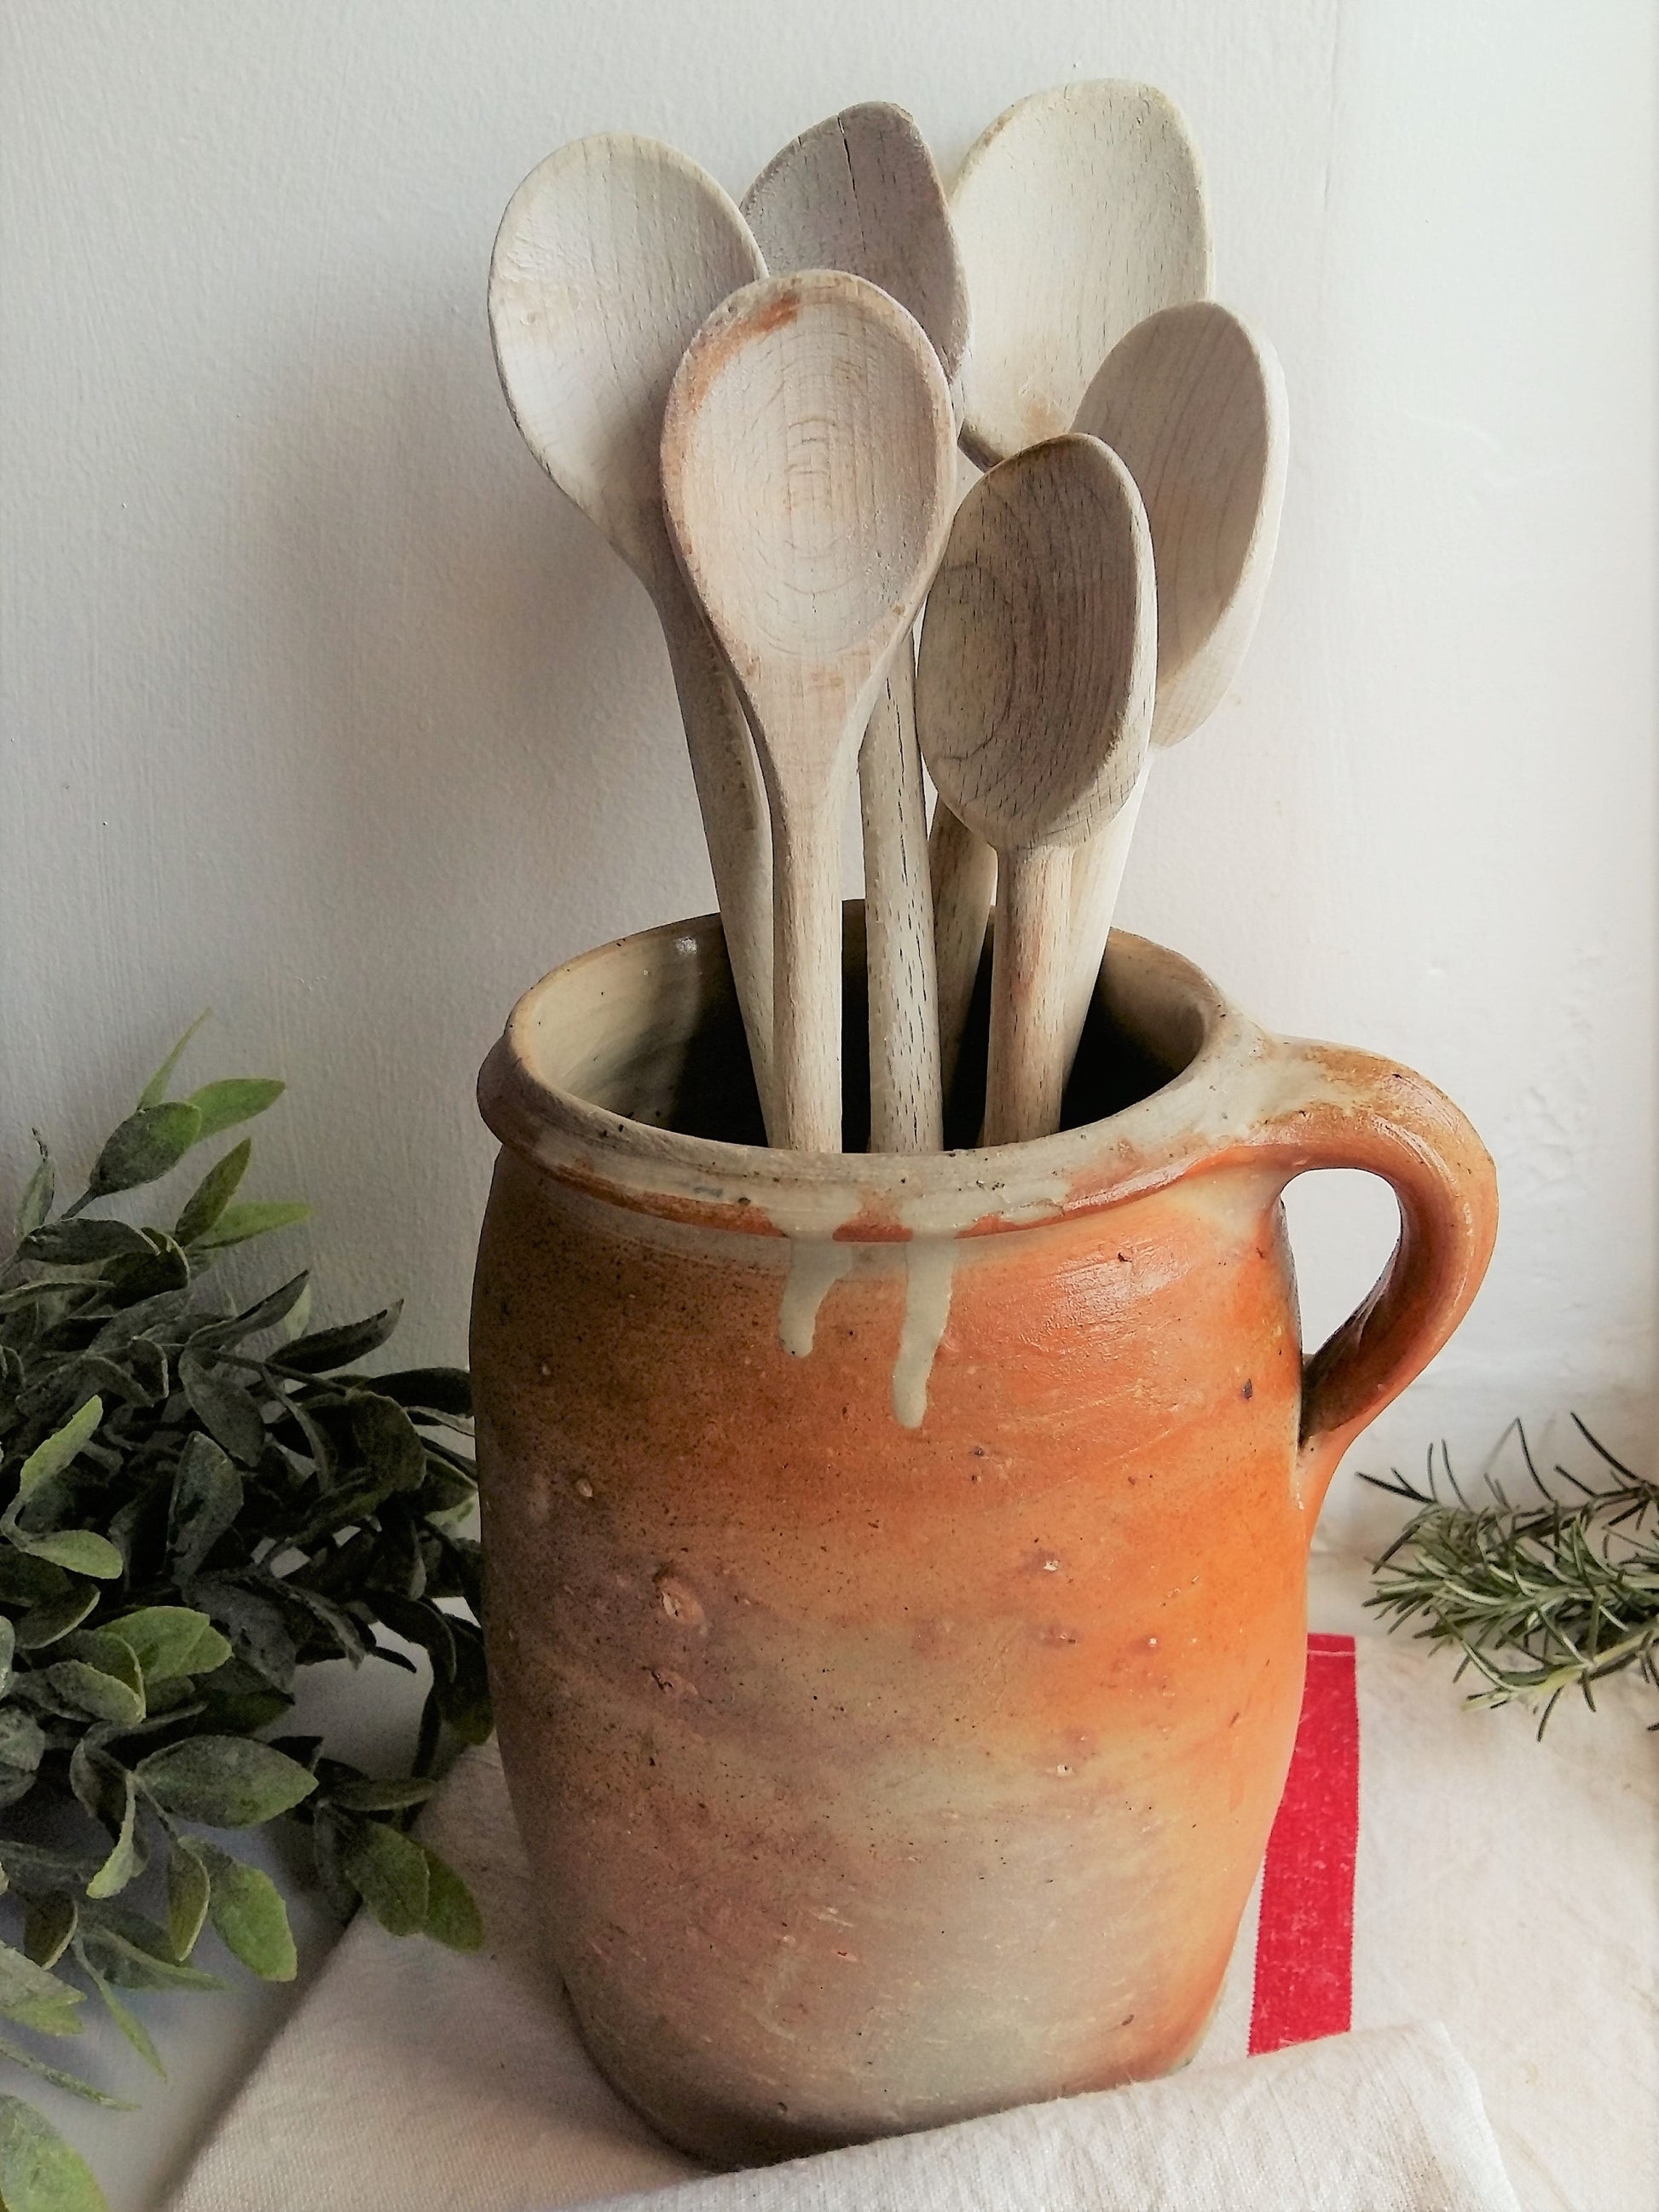 Set of SIX Vintage Bleached Long Wooden Spoons. from Tiggy & Pip - €54.00! Shop now at Tiggy and Pip